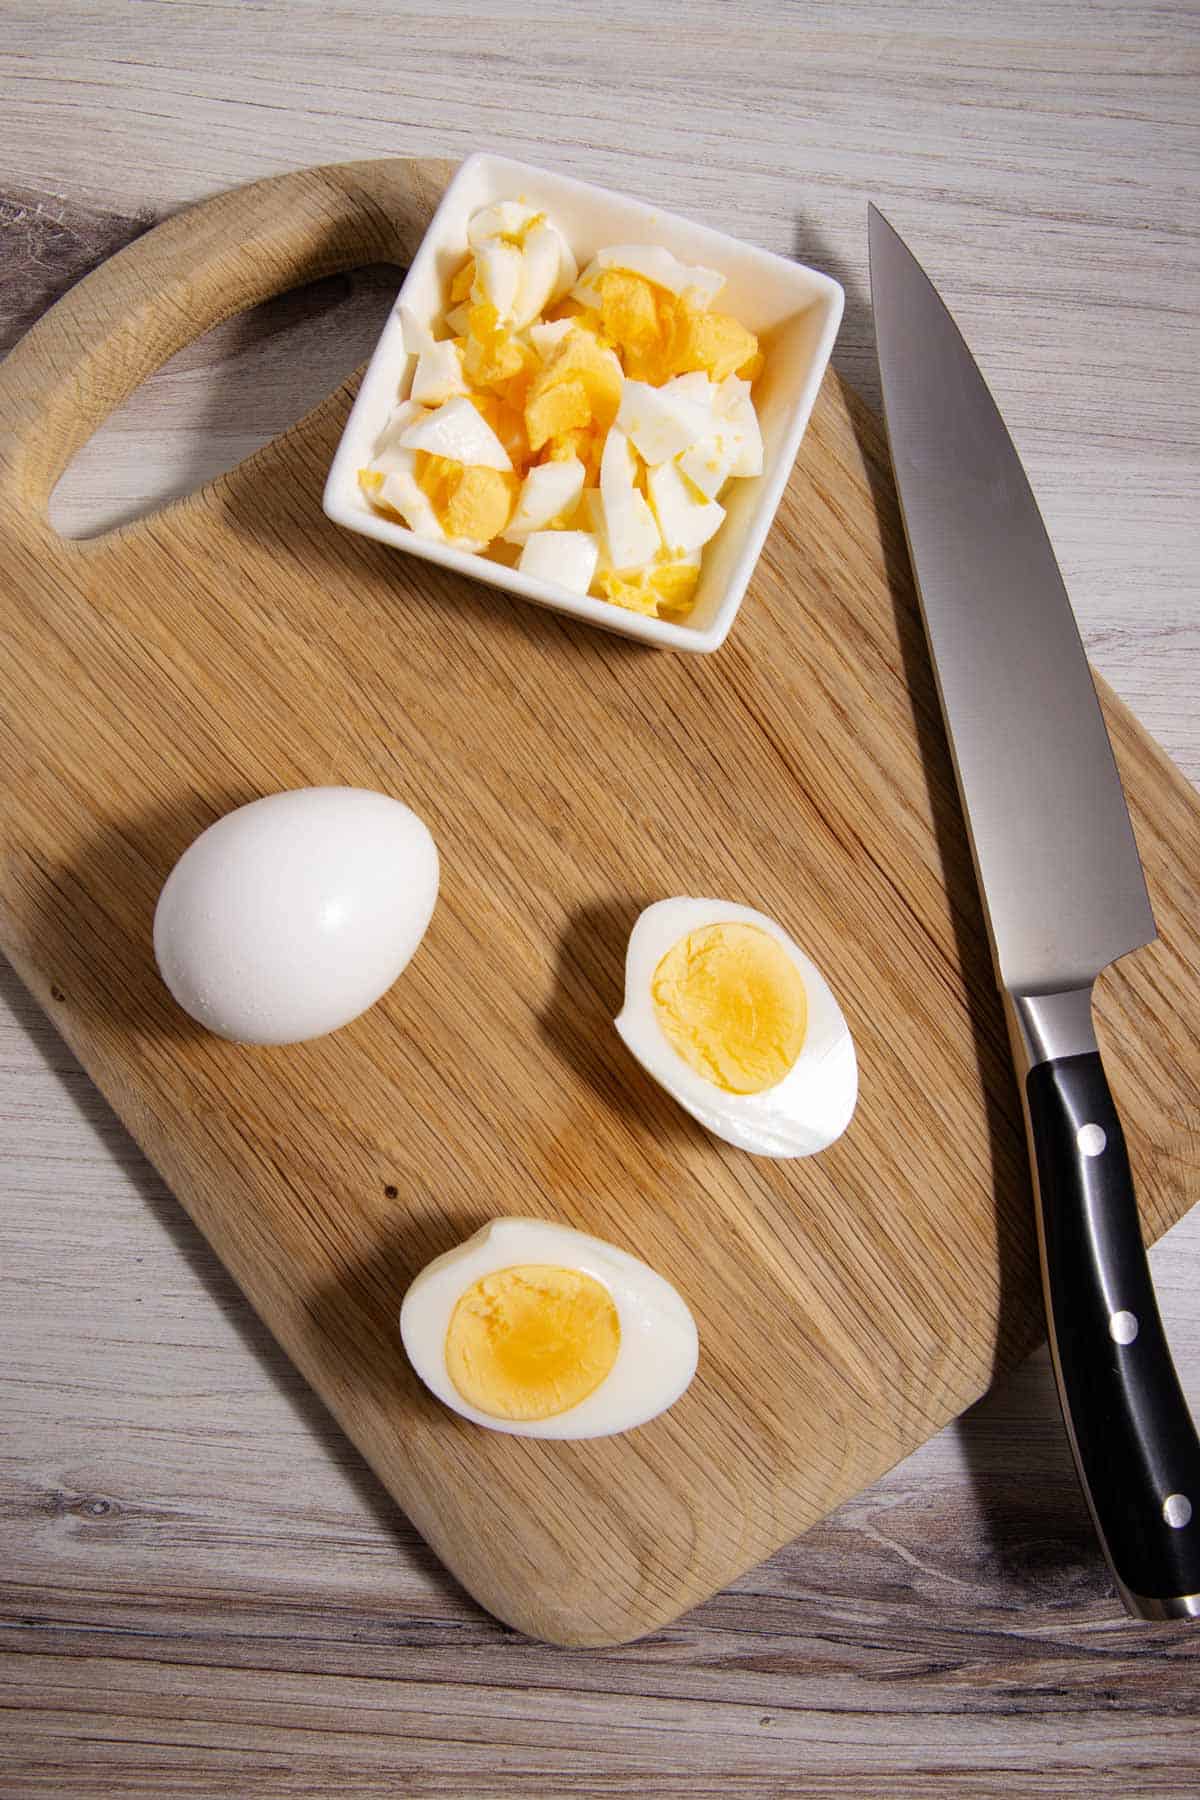 Hard-boiled eggs being chopped on a cutting board.